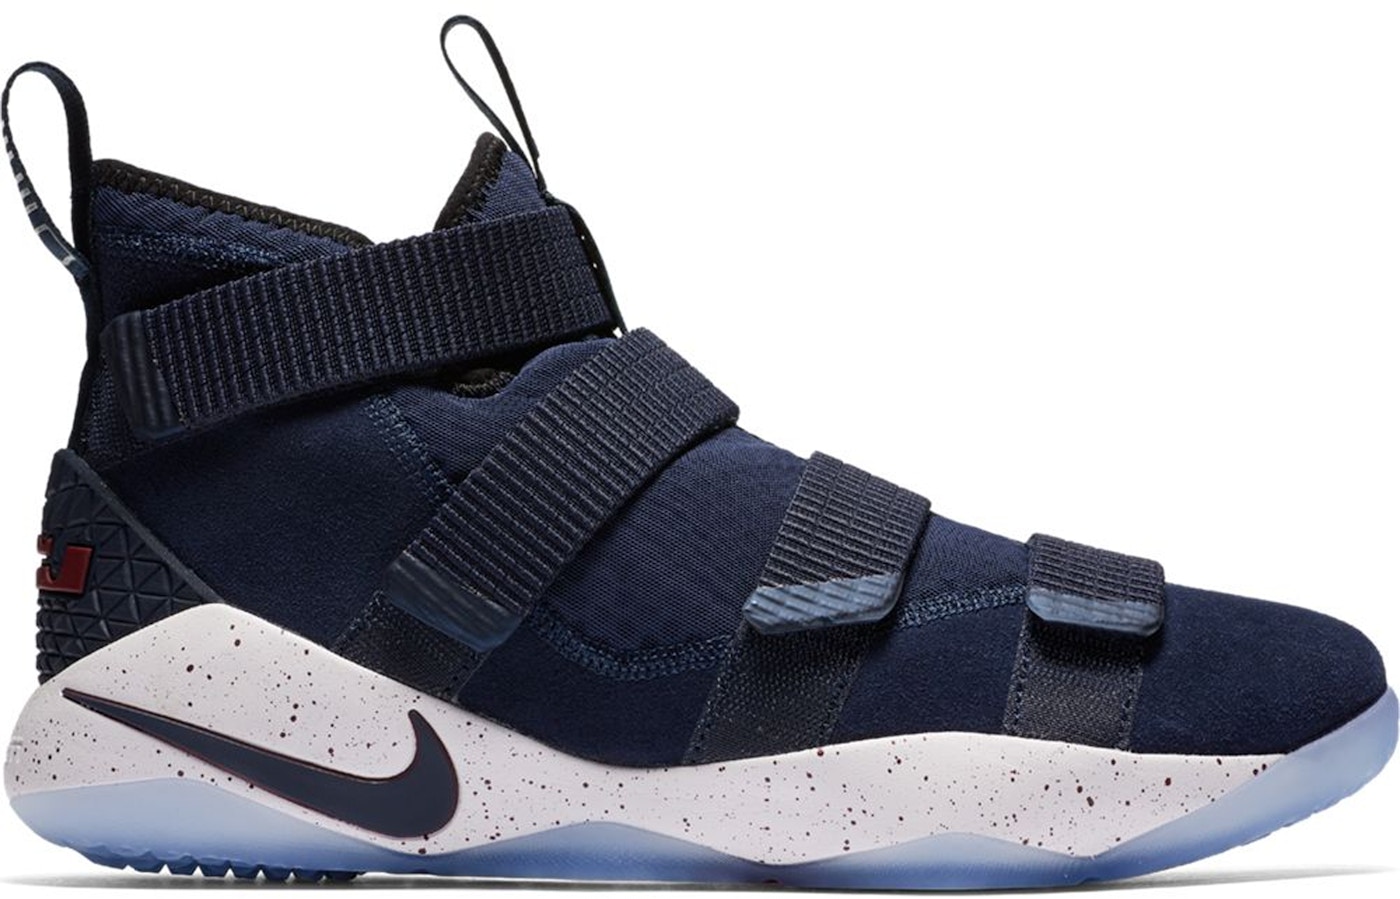 Nike LeBron Zoom Soldier 11 College Navy - 897644-401